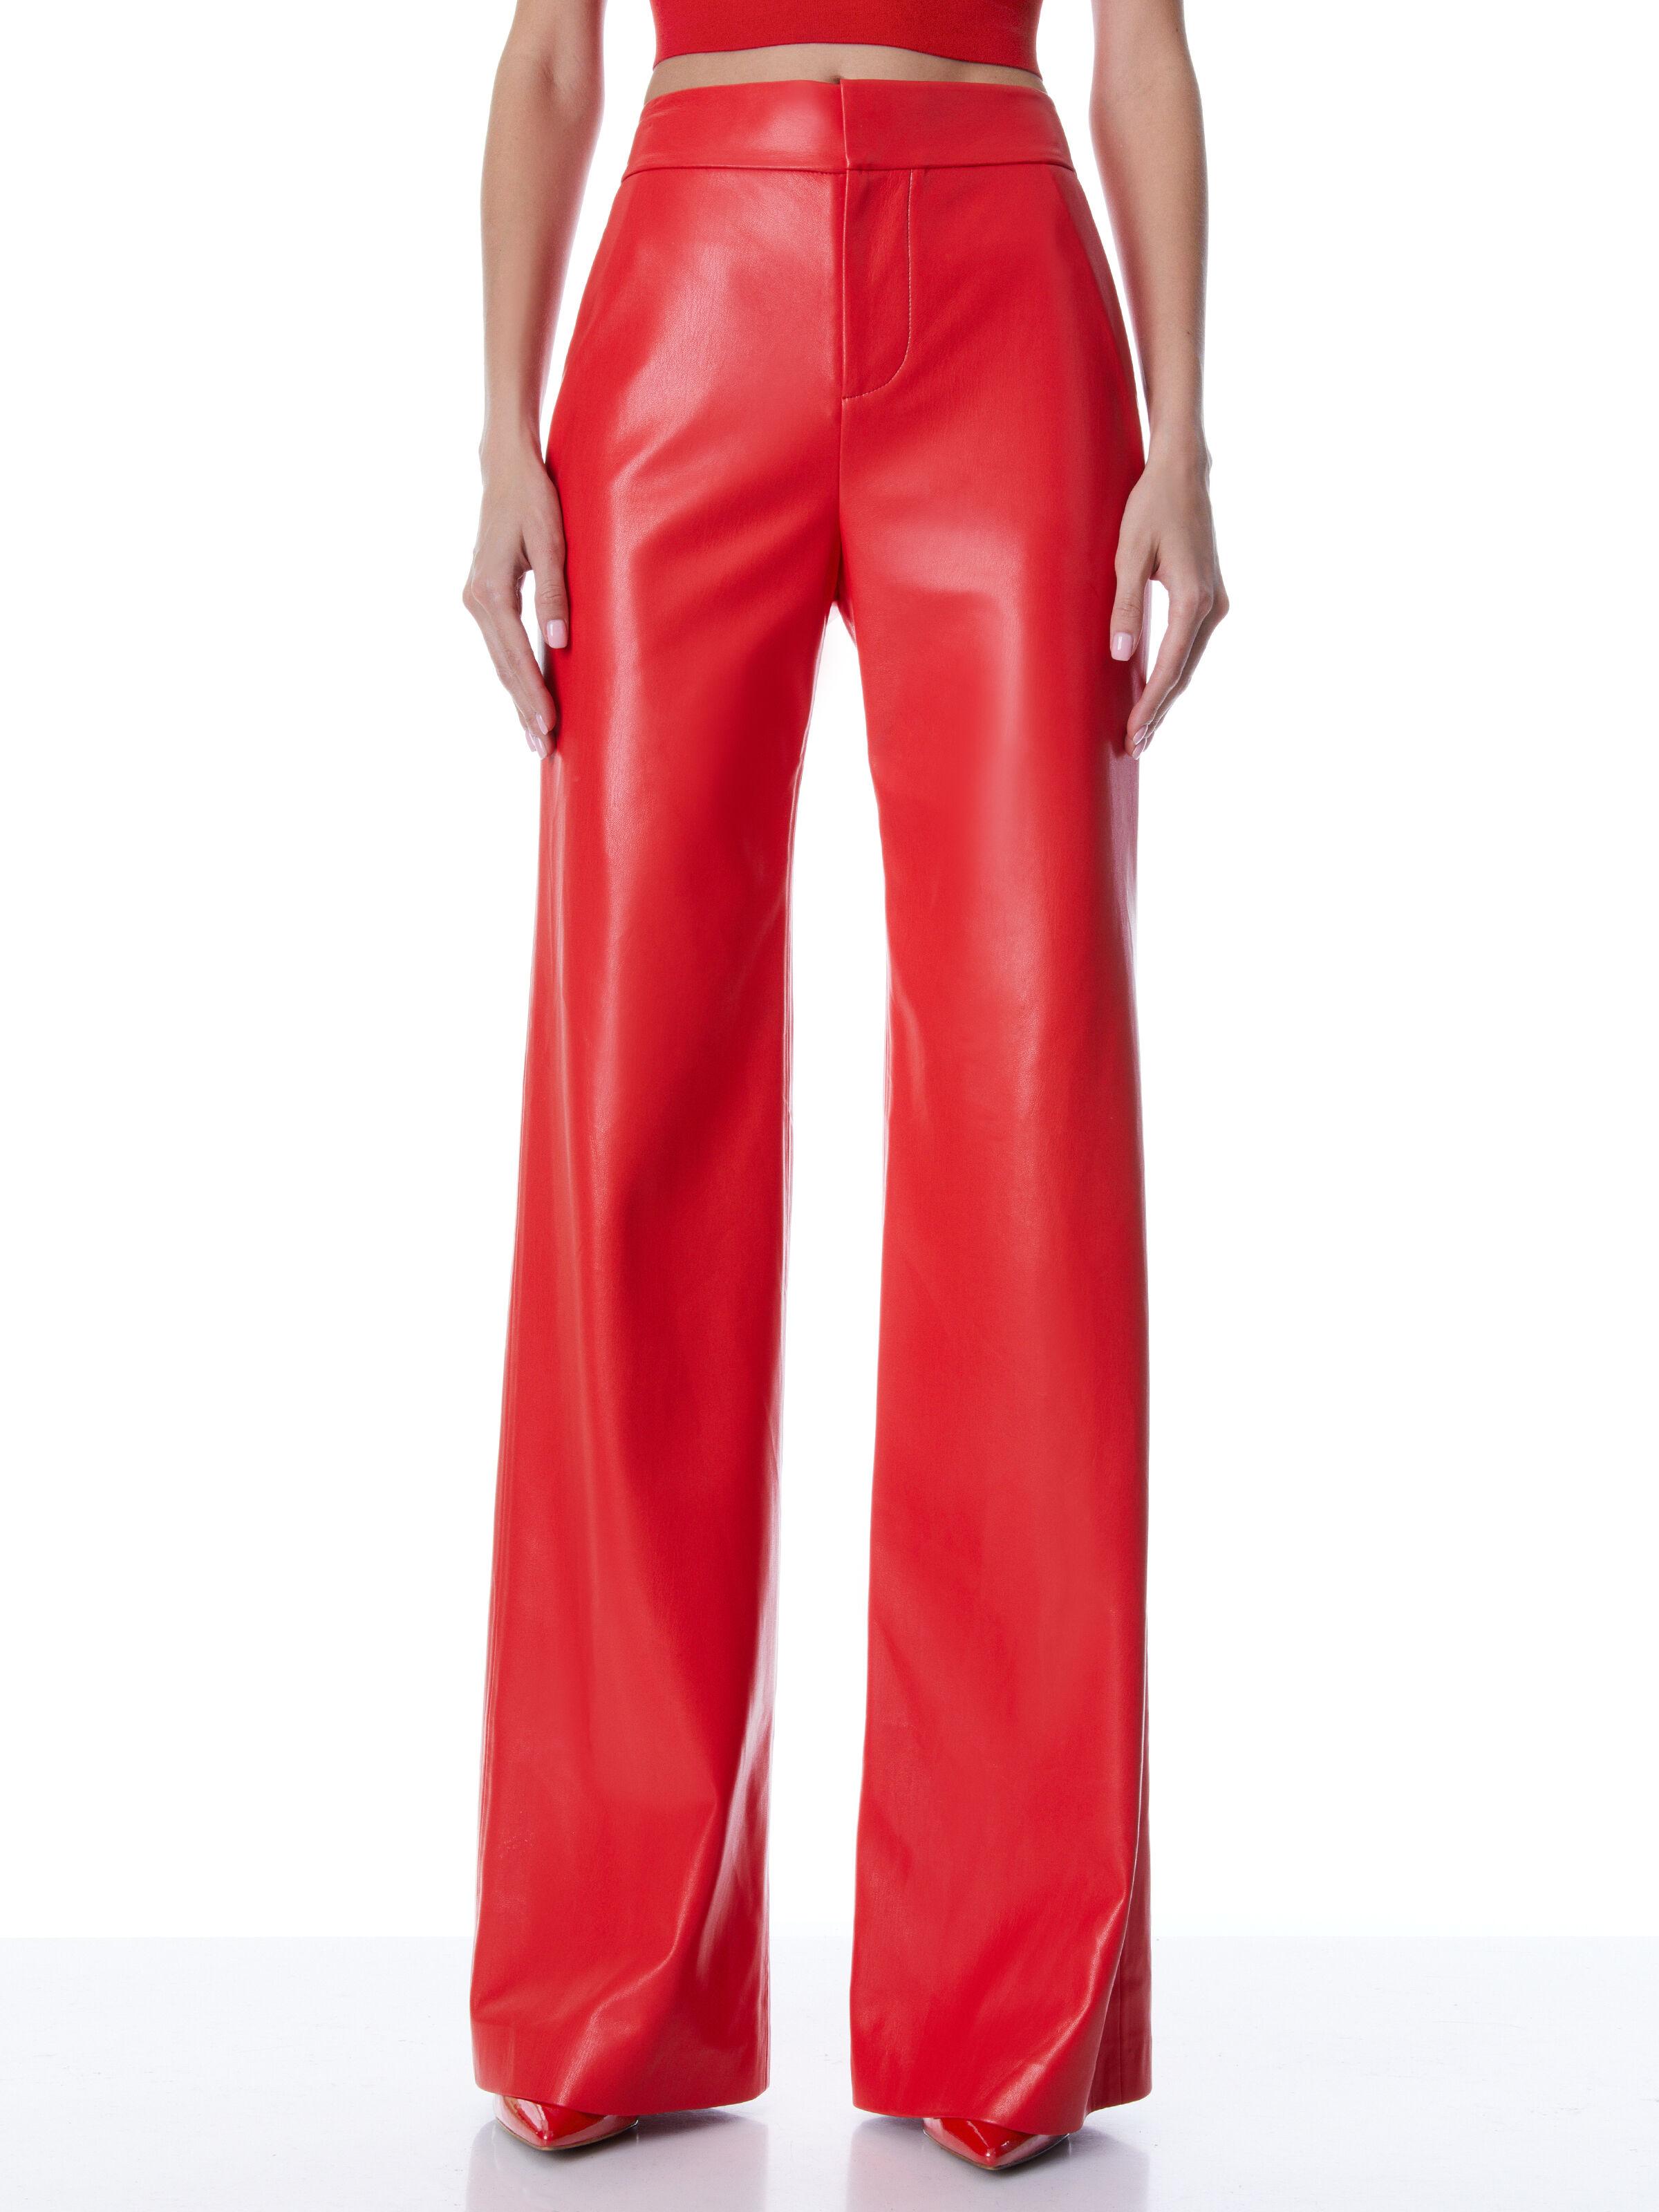 Alice + Olivia Deanna High Waisted Vegan Leather Bootcut Pant in Red